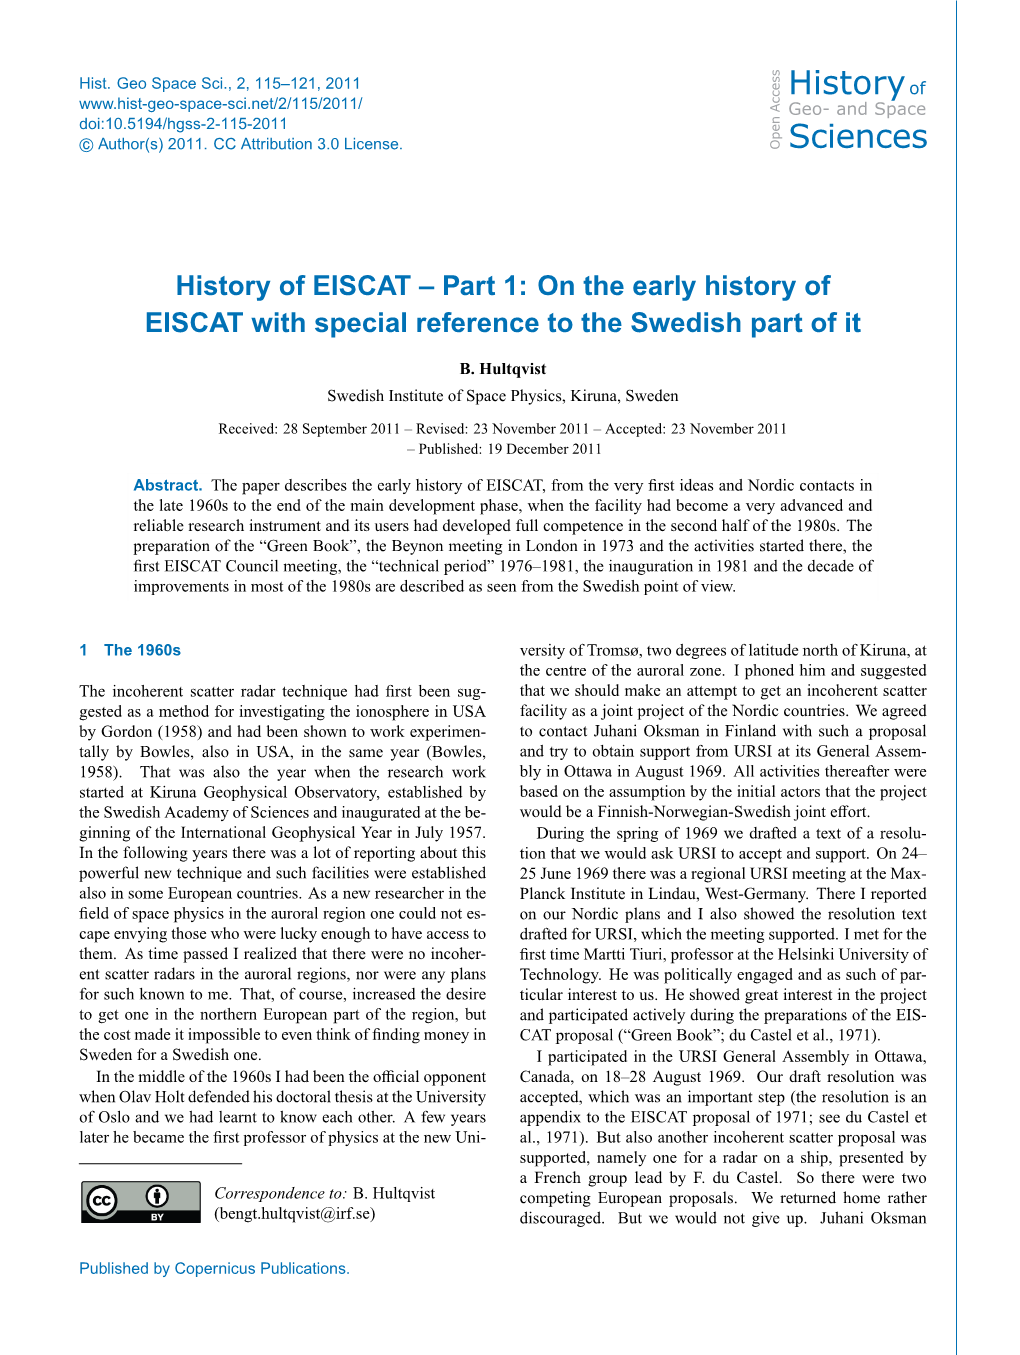 Part 1: on the Early History of EISCAT with Special Reference To